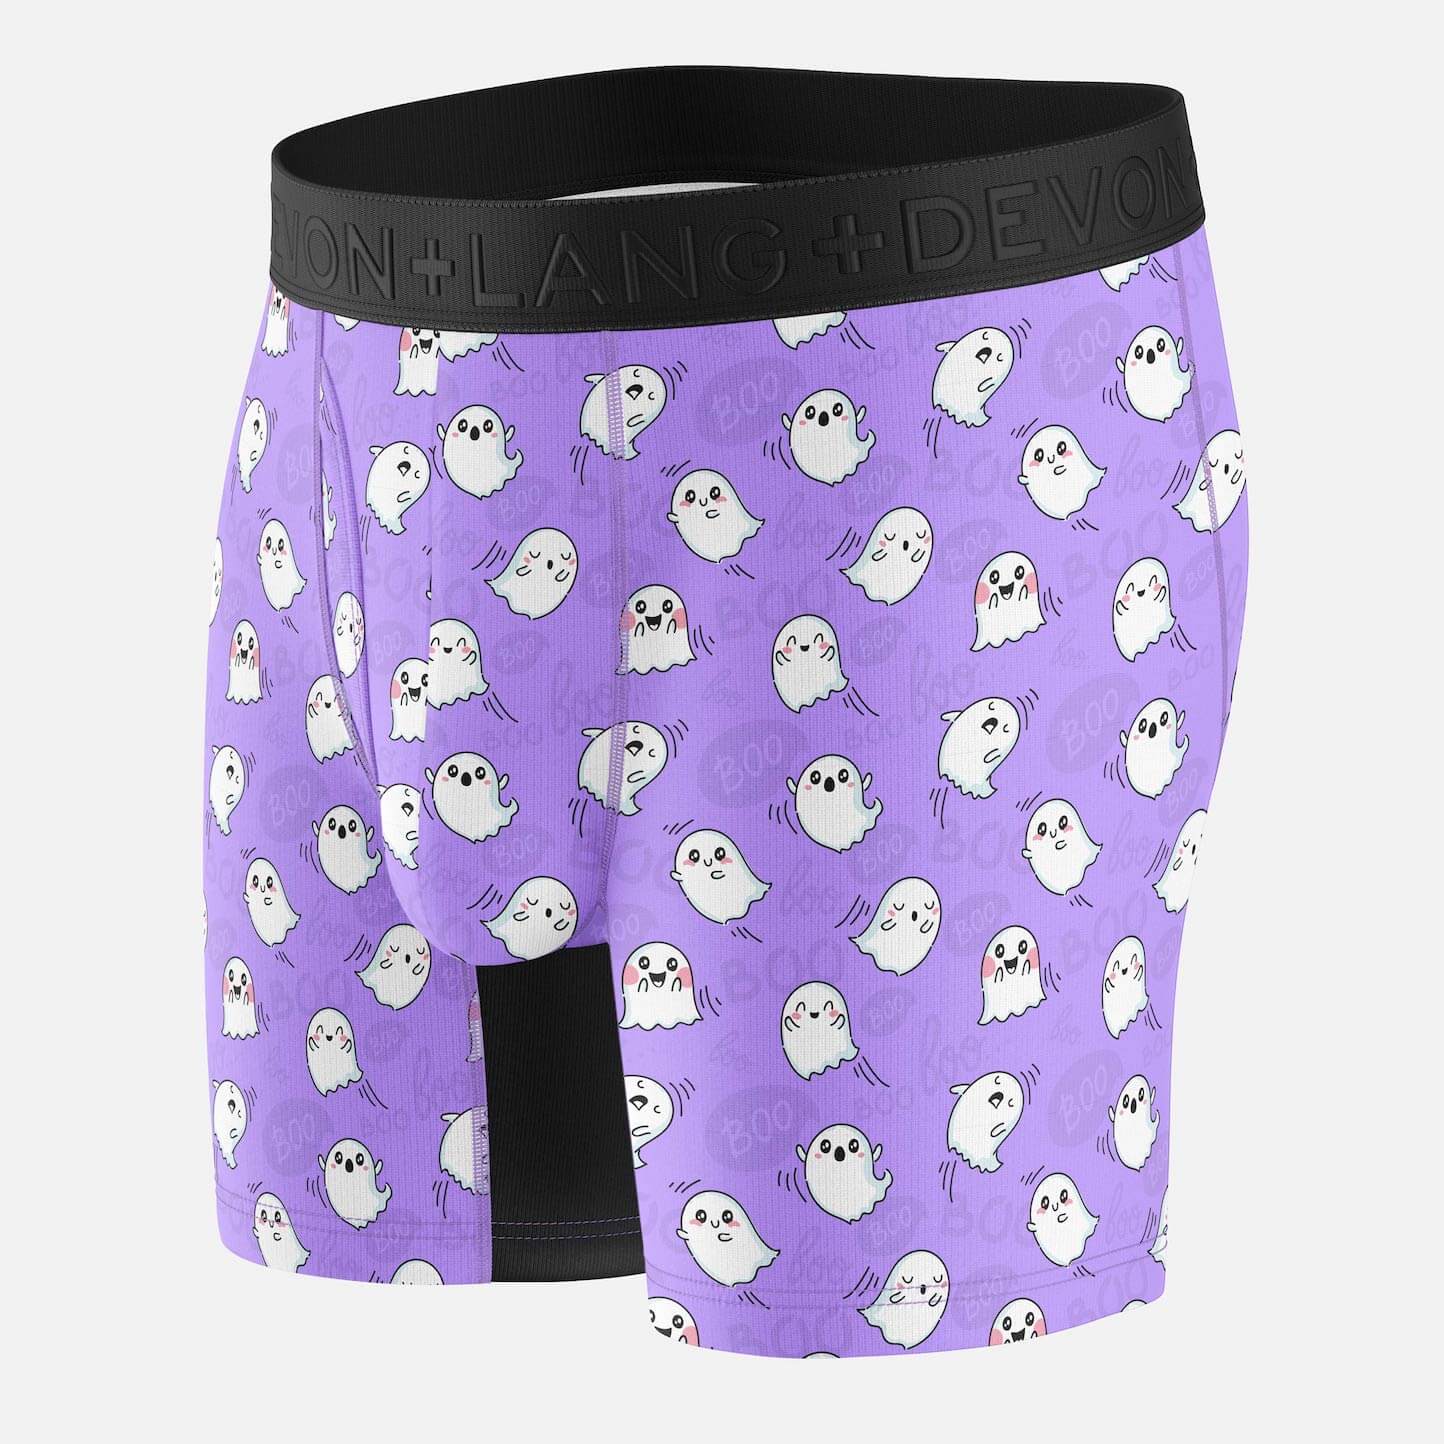 Journey Boxer Brief - Cute Ghosts